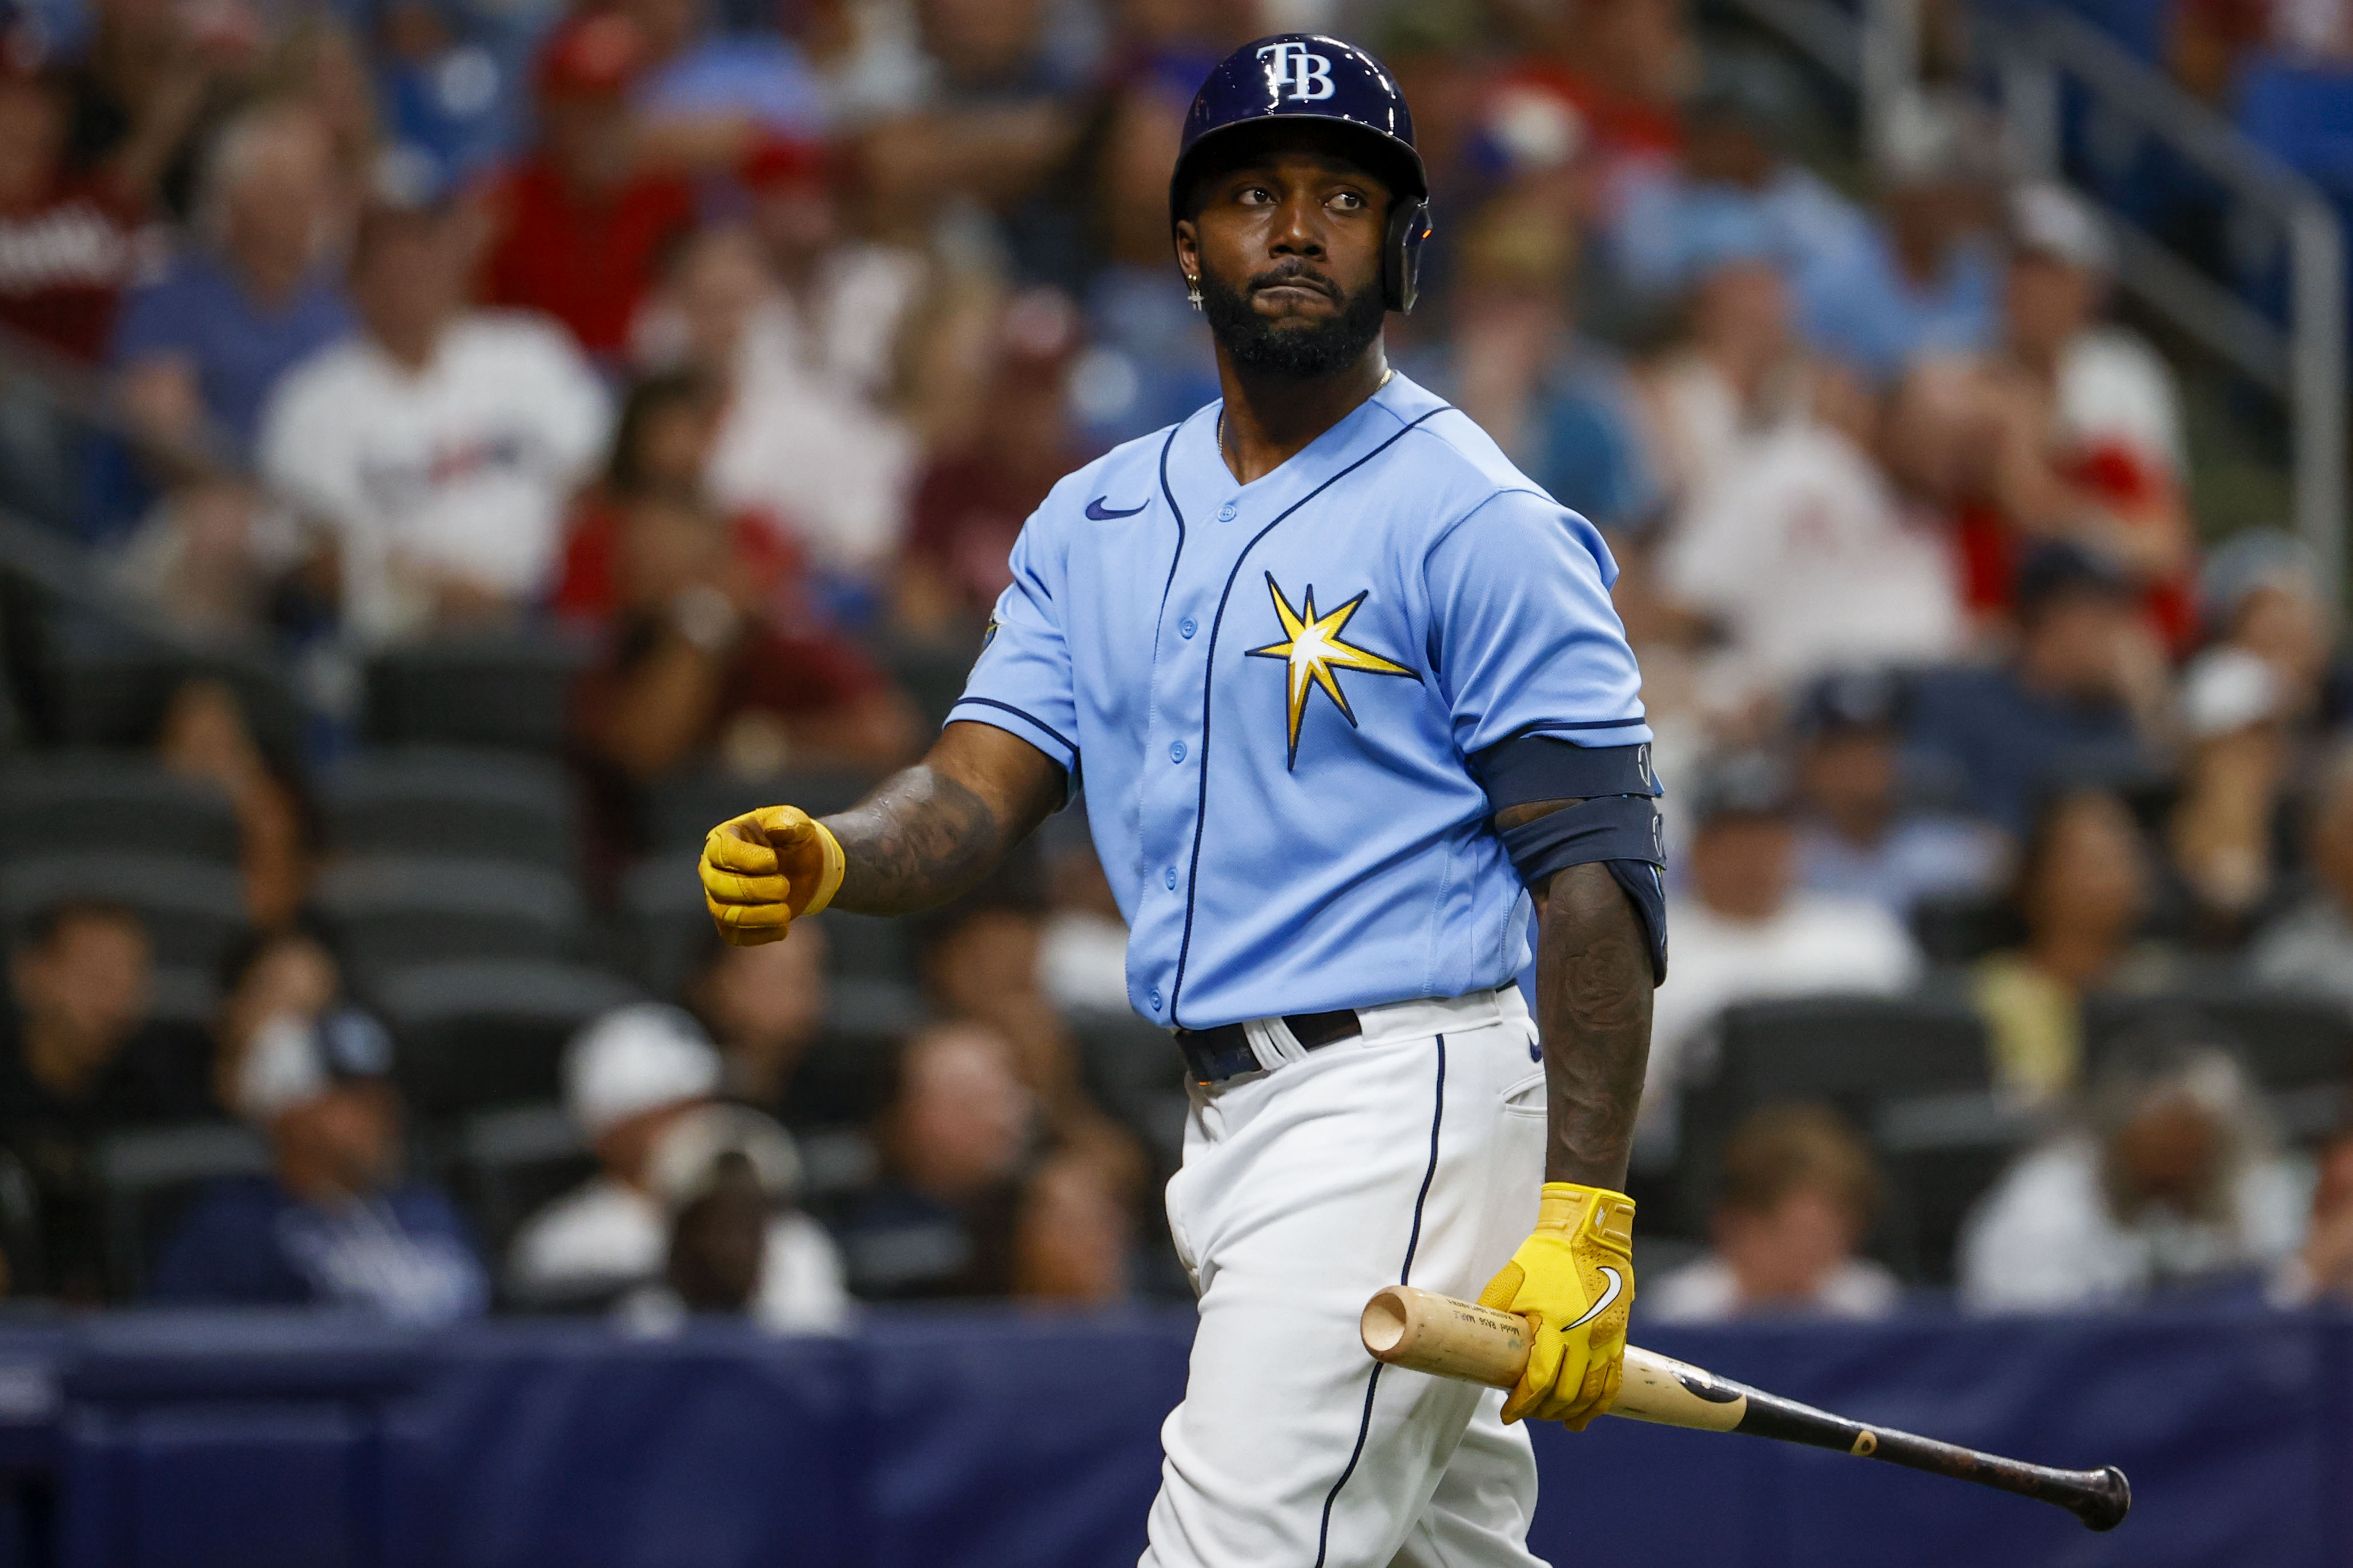 Rays' Randy Arozarena to face close friend Adolis Garcia in Home Run Derby